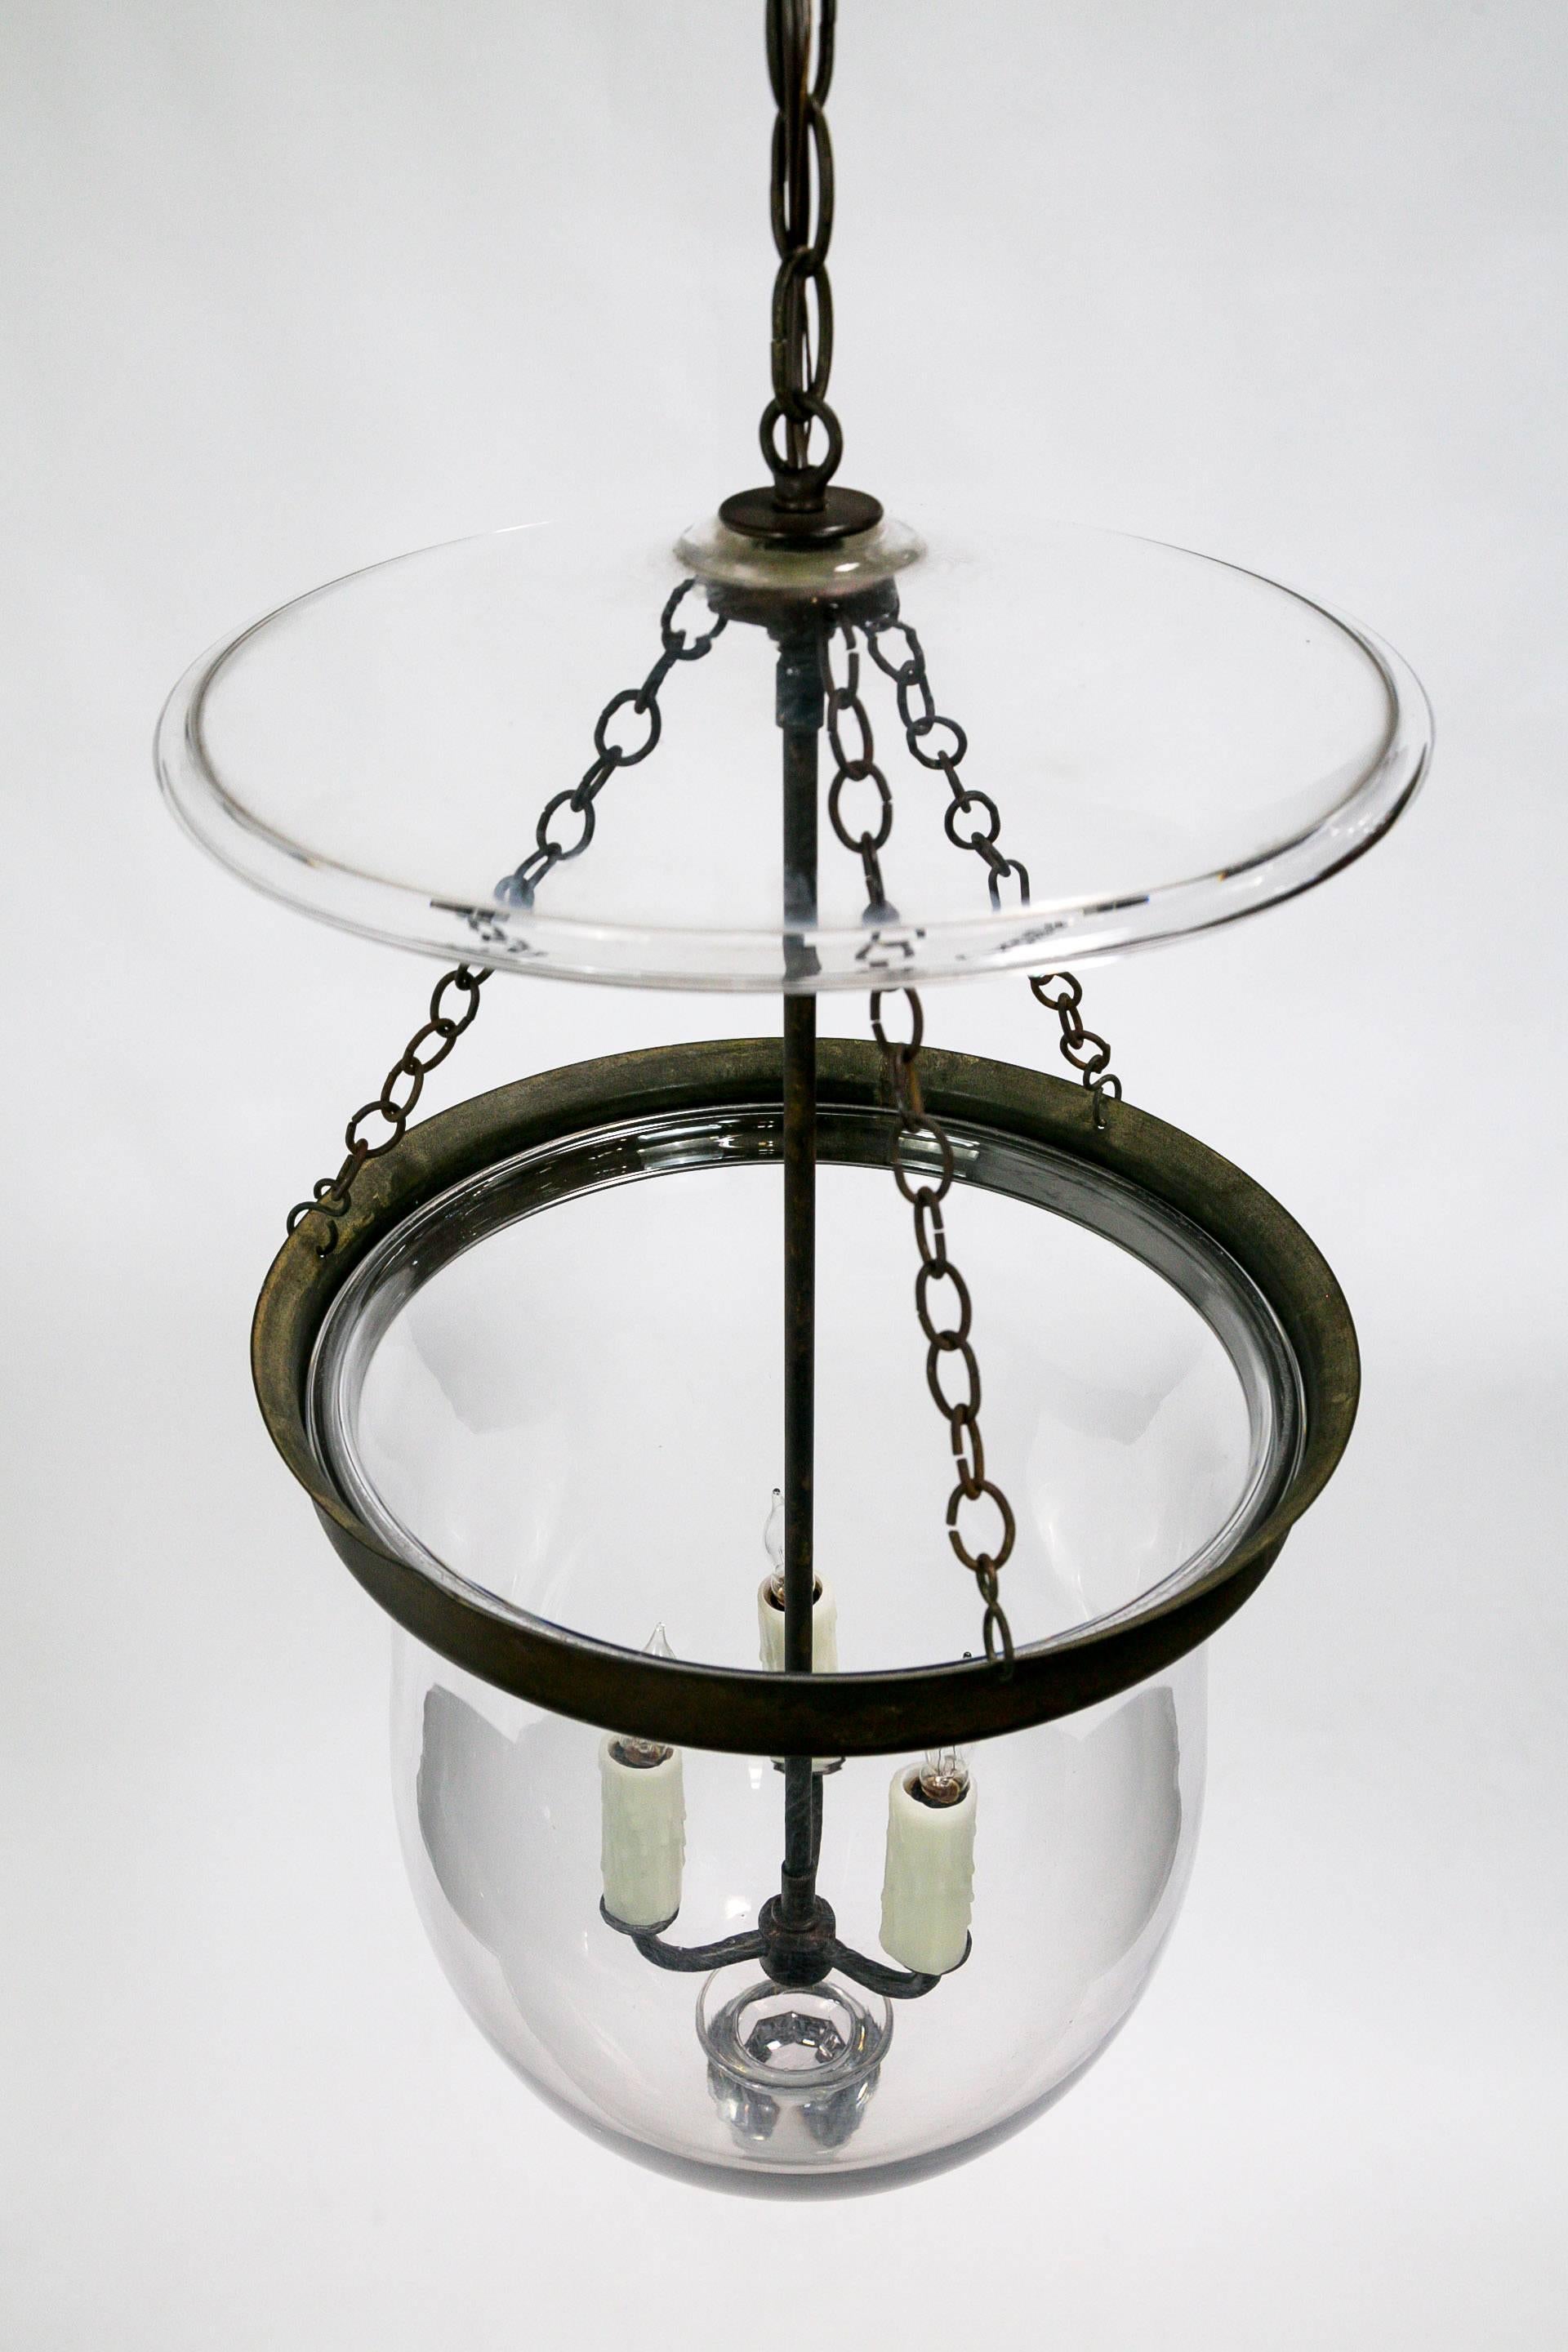 This Georgian style bell Jar lantern has a beautiful, rounded shape; with brass glass holder and chain in an oil rubbed bronze finish. The jar glass is hand blown and with a decorative glass finial and smoke bell. Three-light candelabra sockets with